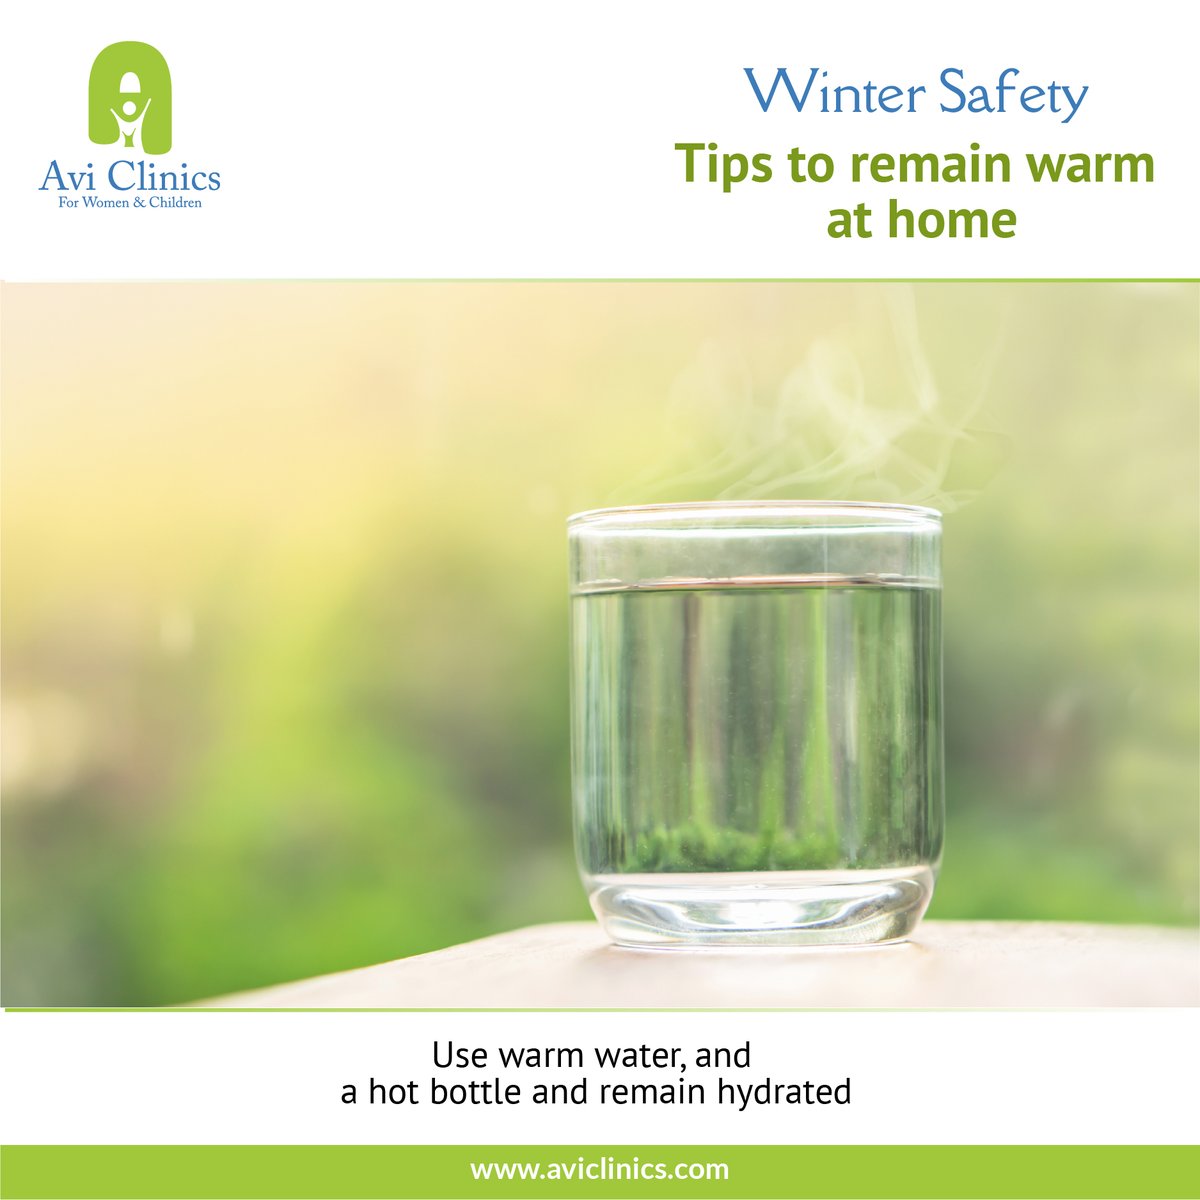 Winter Safety Tips for Kids

Tips to remain warm at home
Use warm water, and a hot bottle and remain hydrated.

#Weather #WeatherSafety #WeatherSafetyTips #TipsForKids #WinterTips